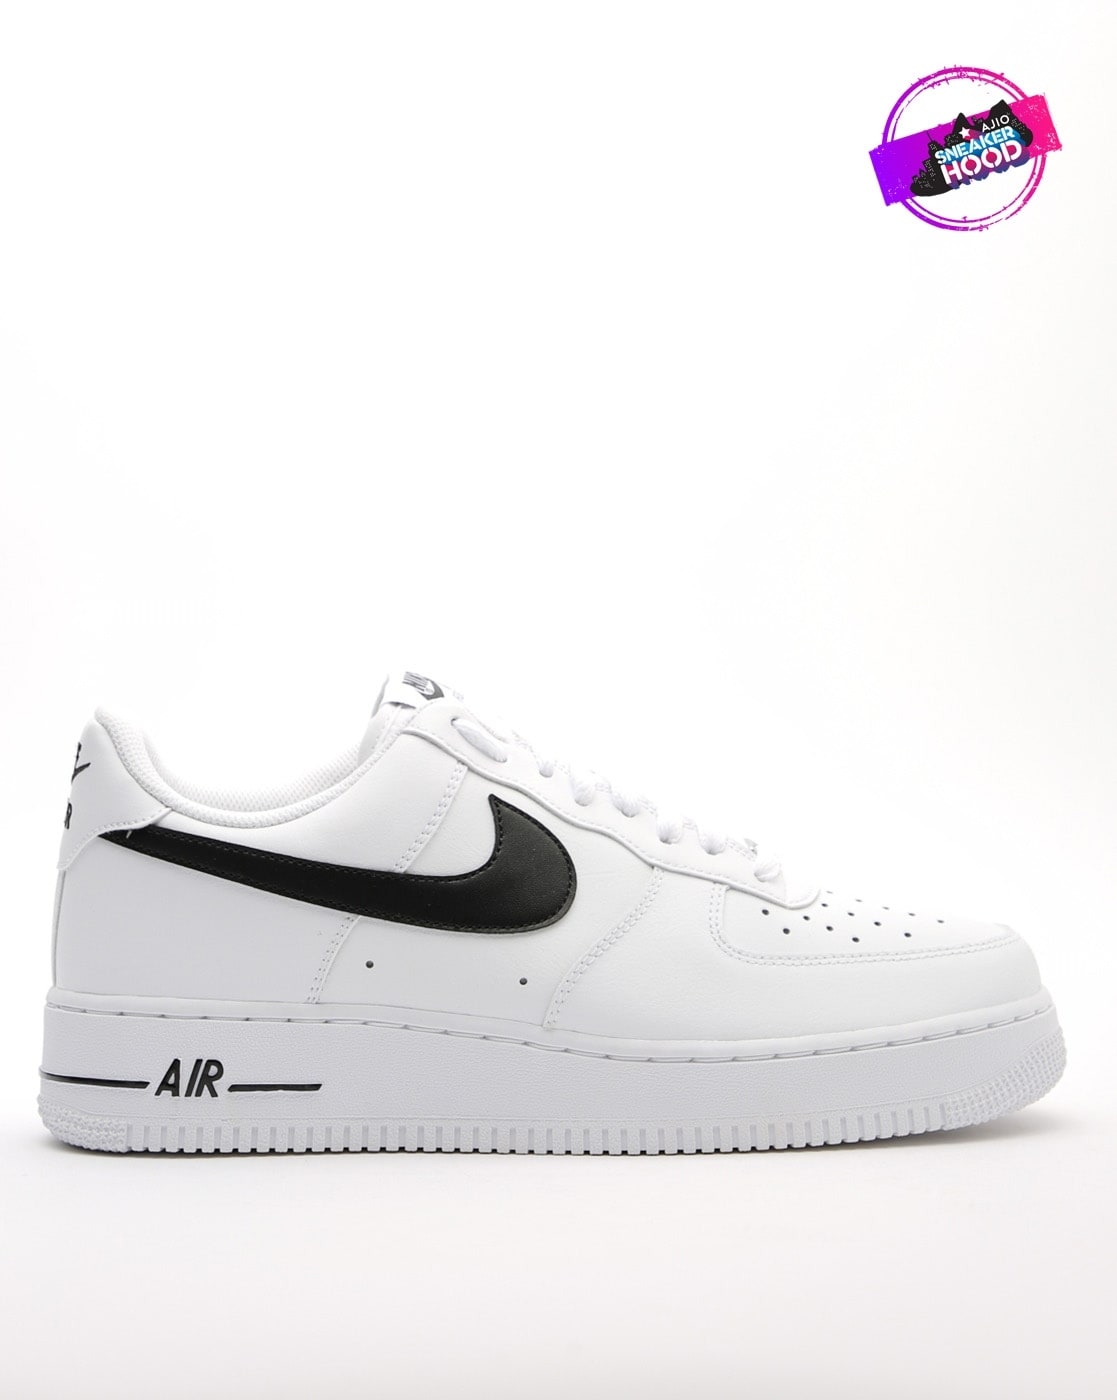 nike shoes discount sale online india